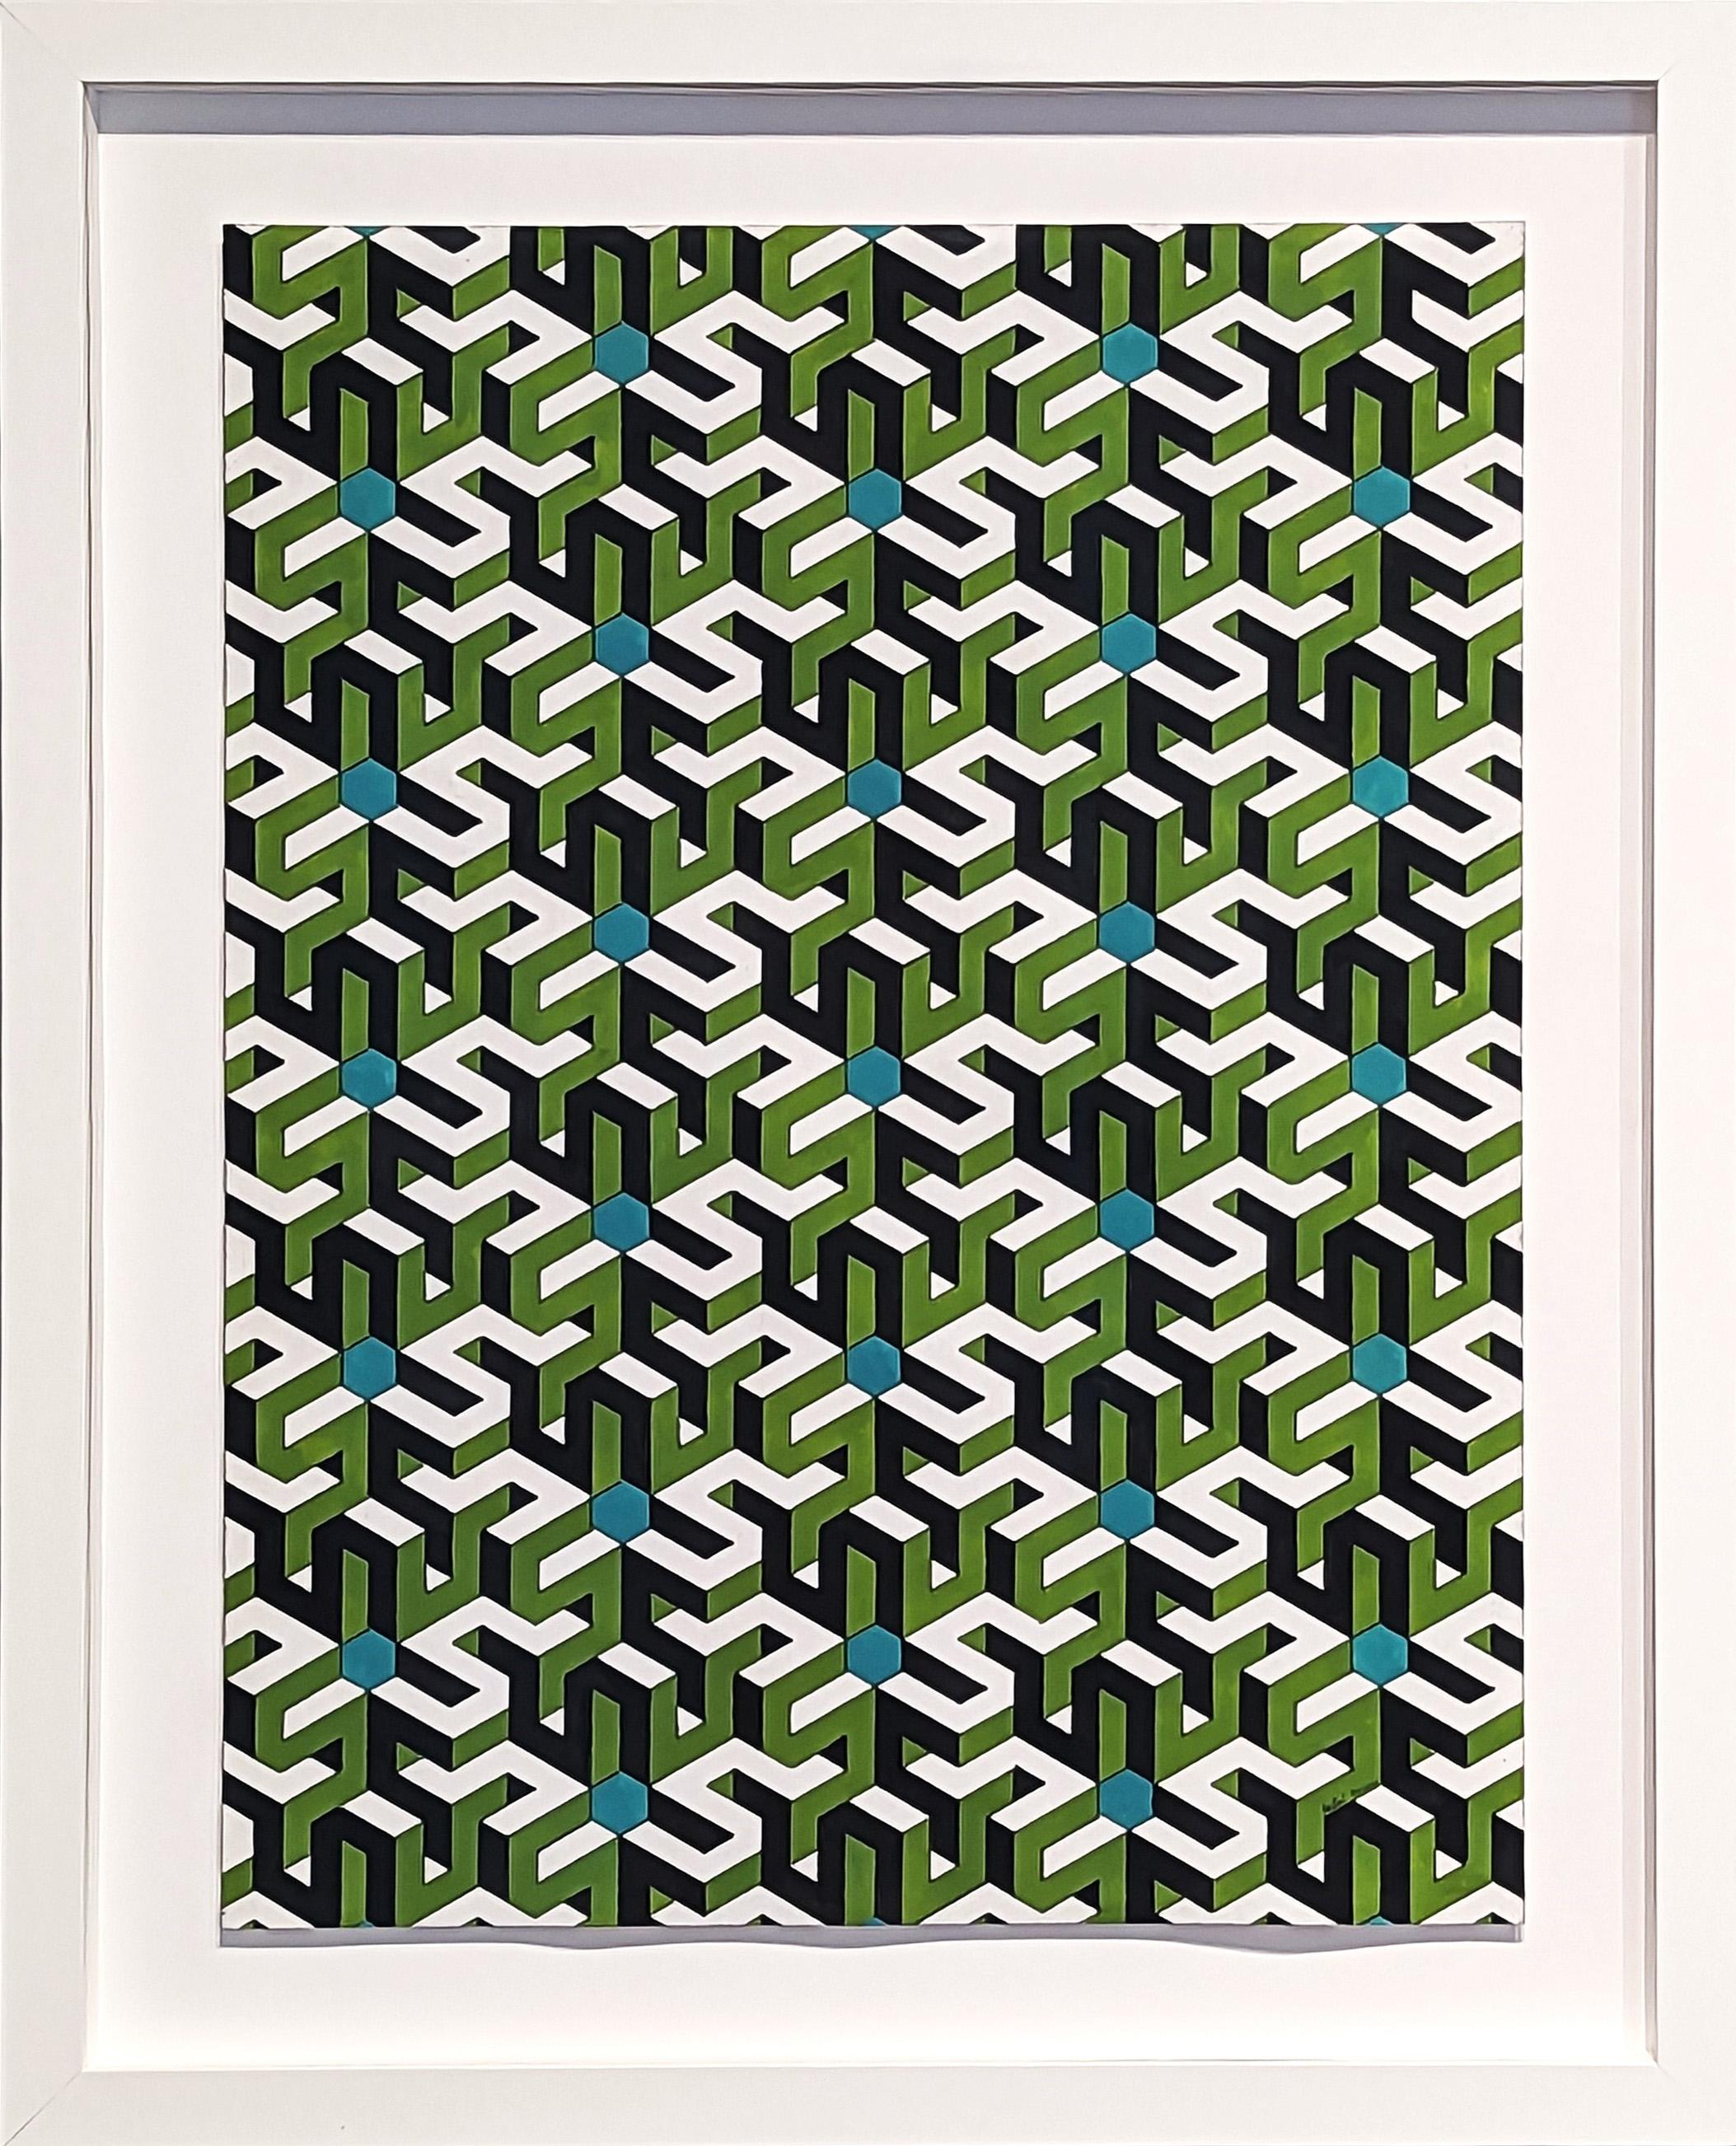 Austin Magruder Abstract Drawing - "Opposite Underlap" Contemporary Green and Aqua Hand Drawn Tessellated Abstract